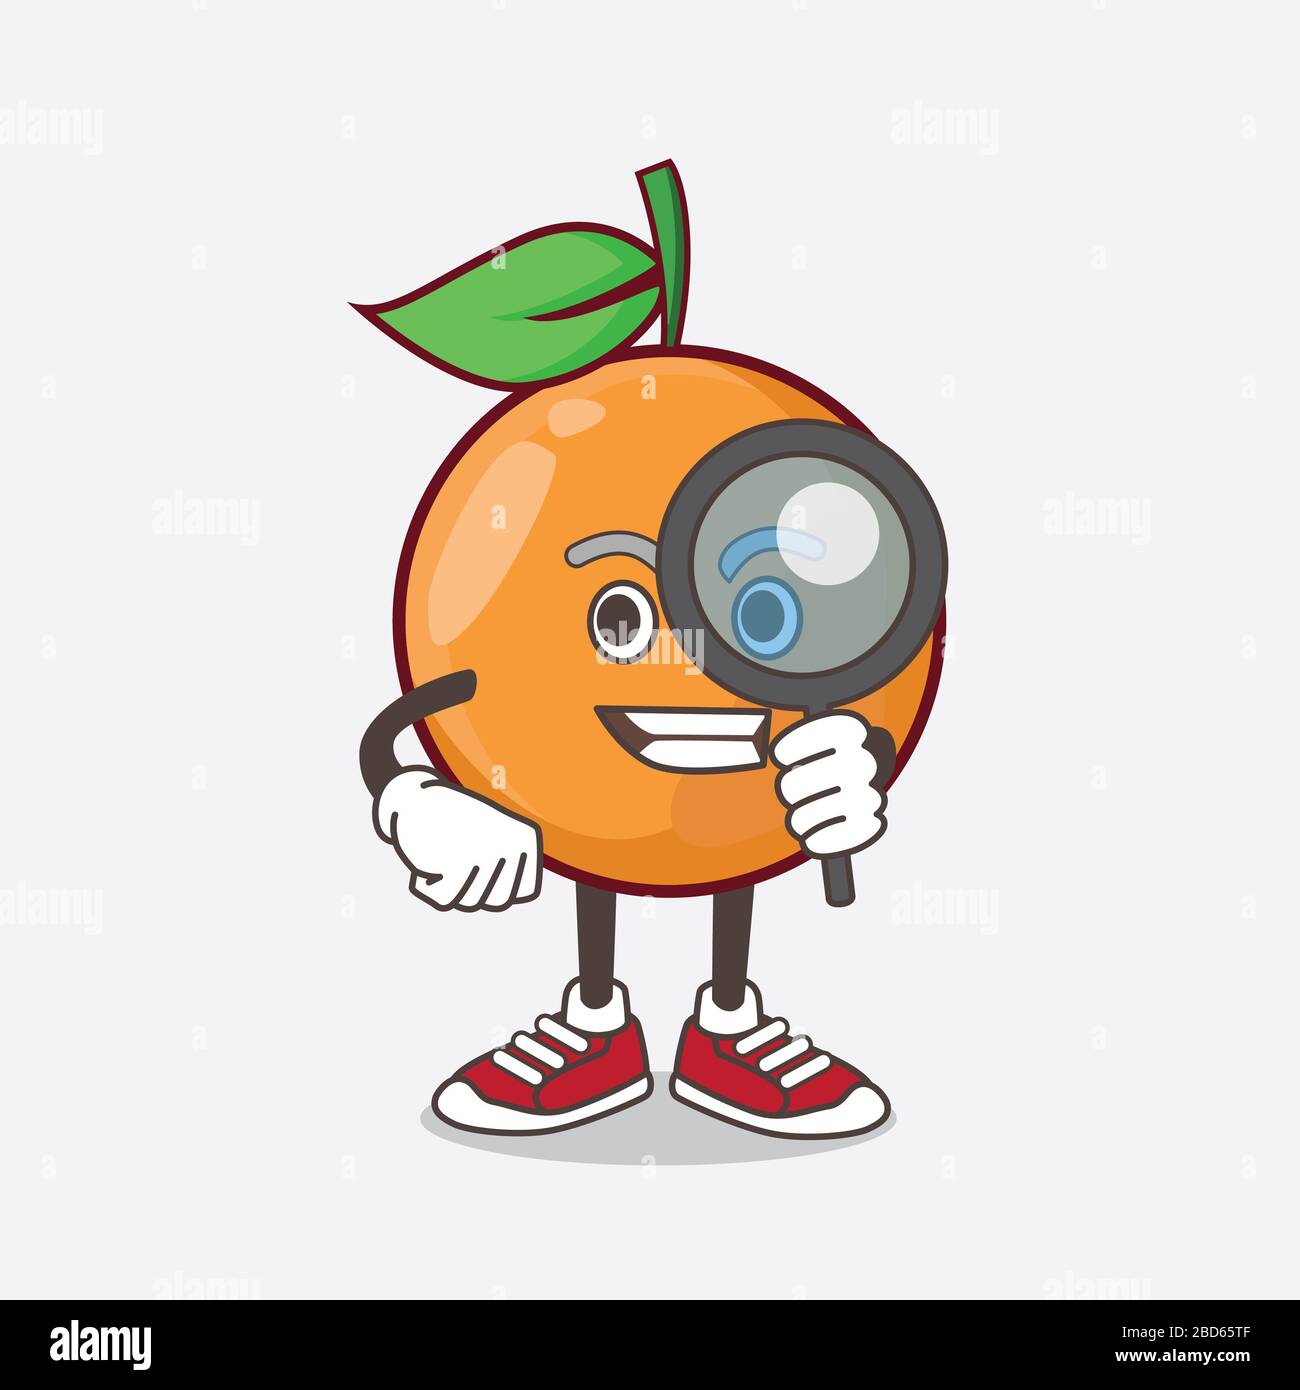 An illustration of Clementine Orange Fruit cartoon mascot character as Detective design Stock Photo